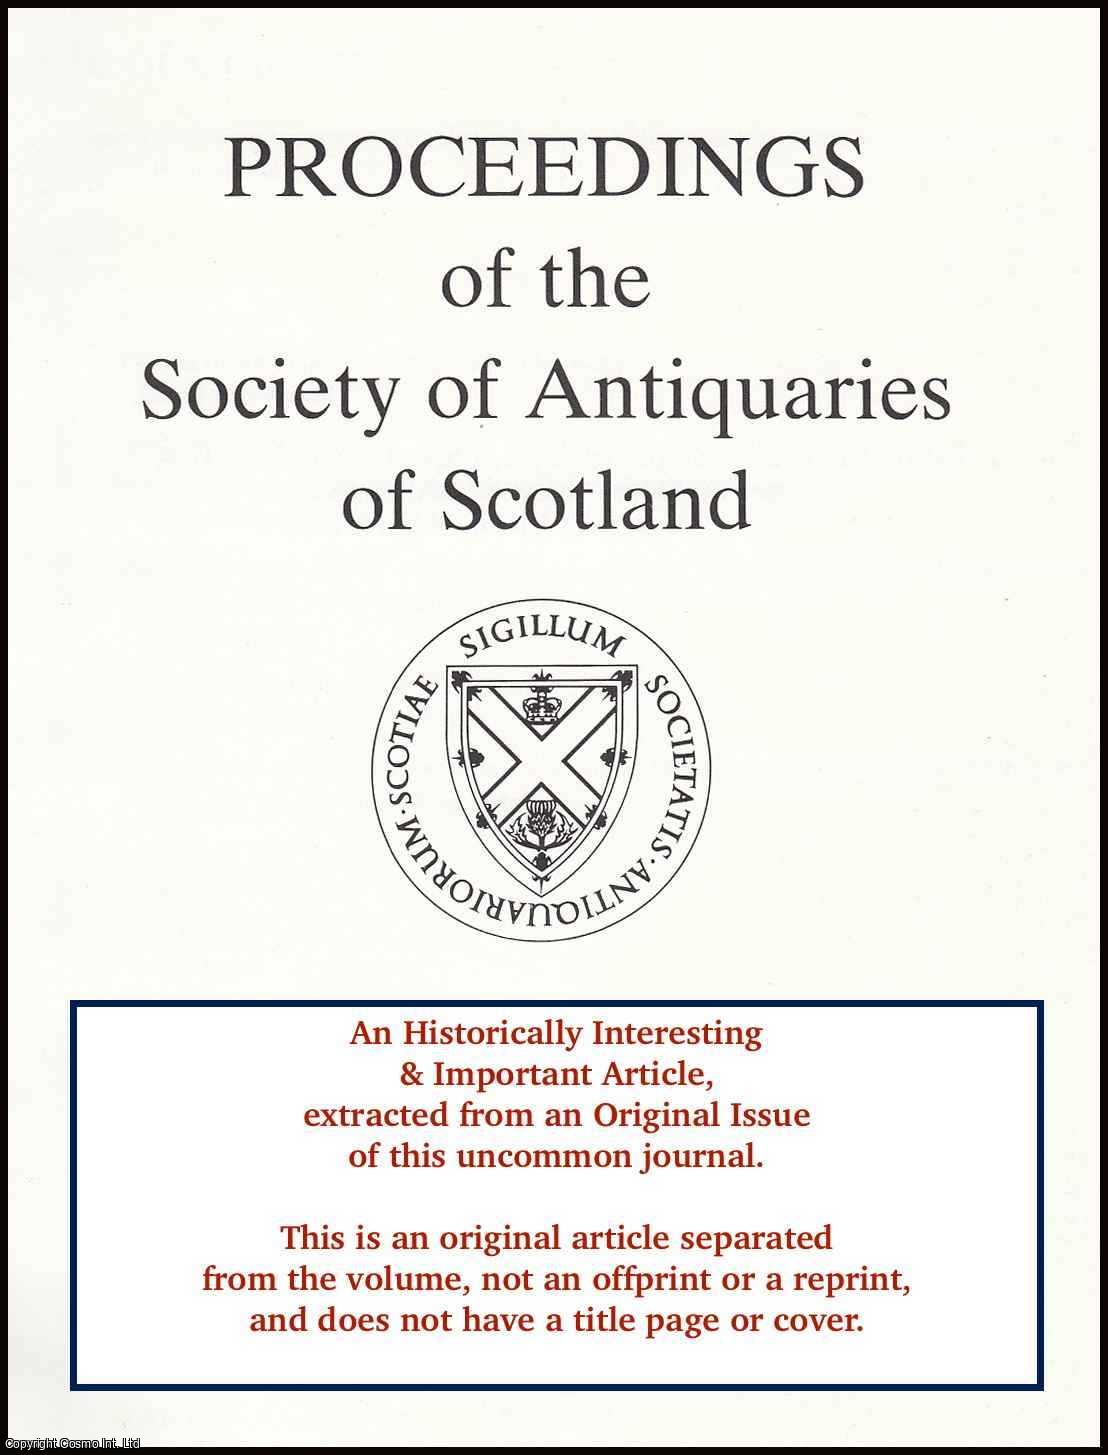 Bateson & N. M. McQ Holmes, J. D. - Roman and Medieval Coins Found in Scotland, 1988-95. An original article from the Proceedings of the Society of Antiquaries of Scotland, 1997.